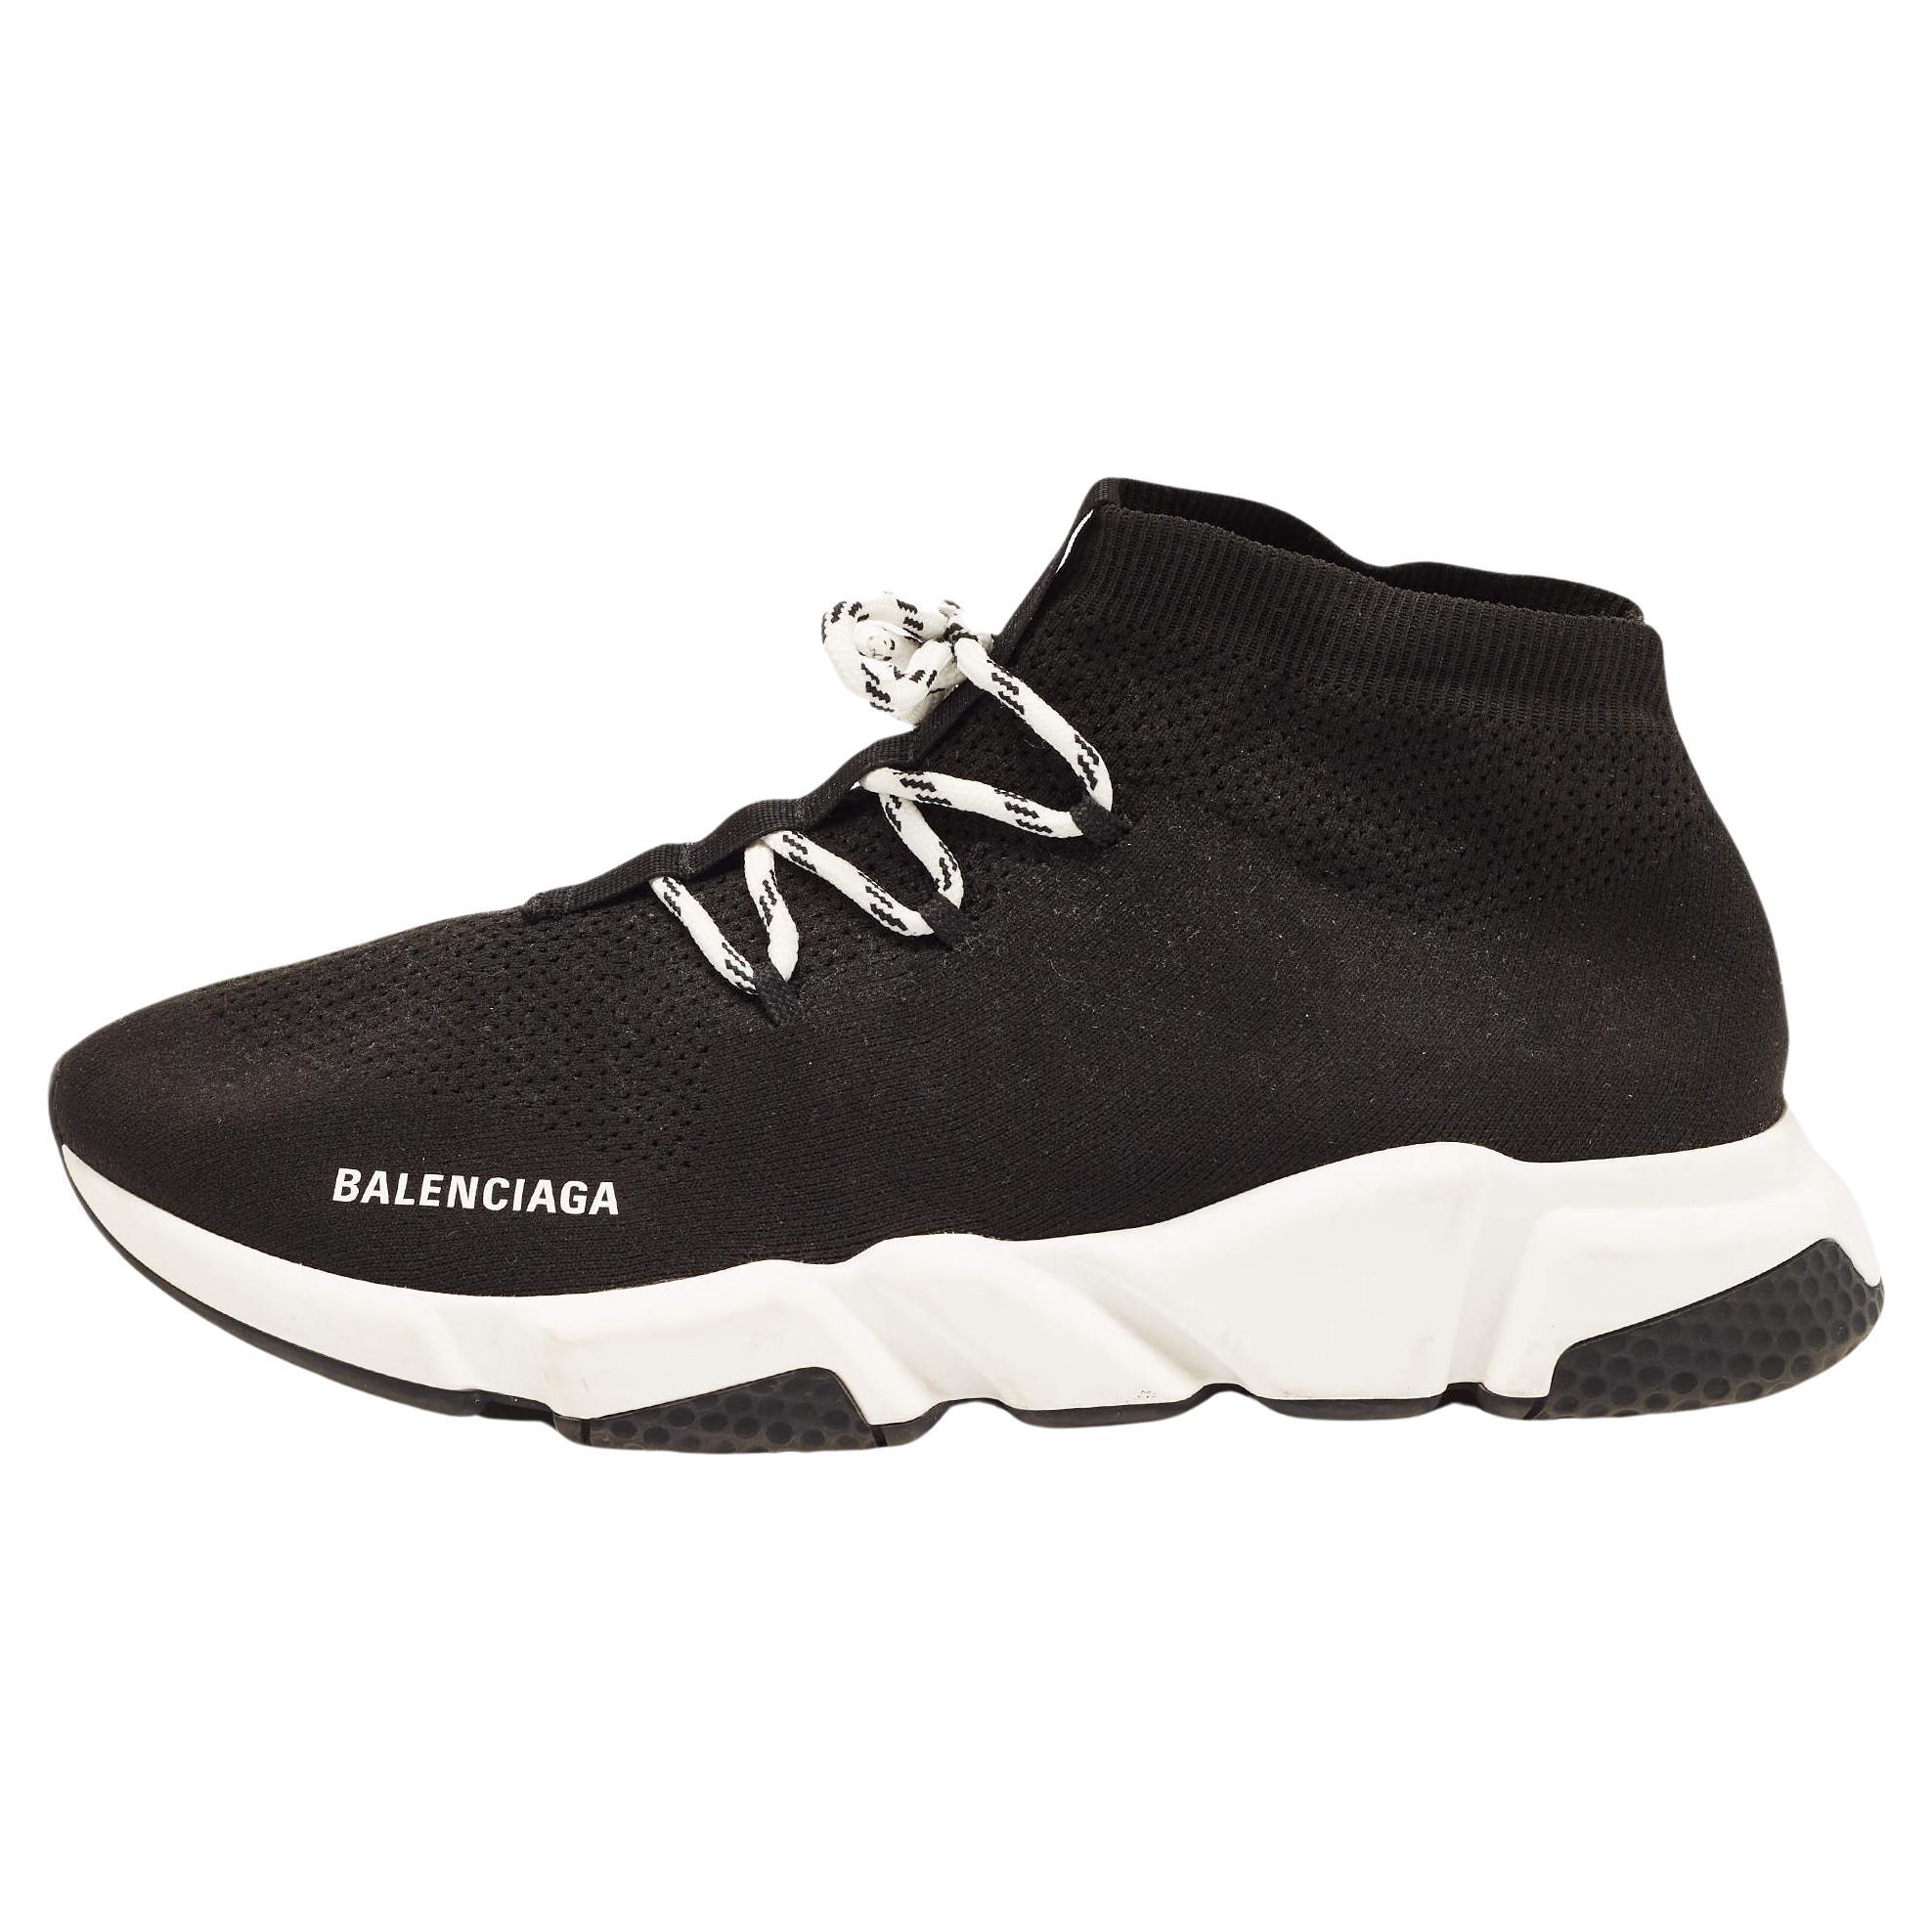 Balenciaga Black Knit Fabric Speed Lace Up Sneakers Size 45